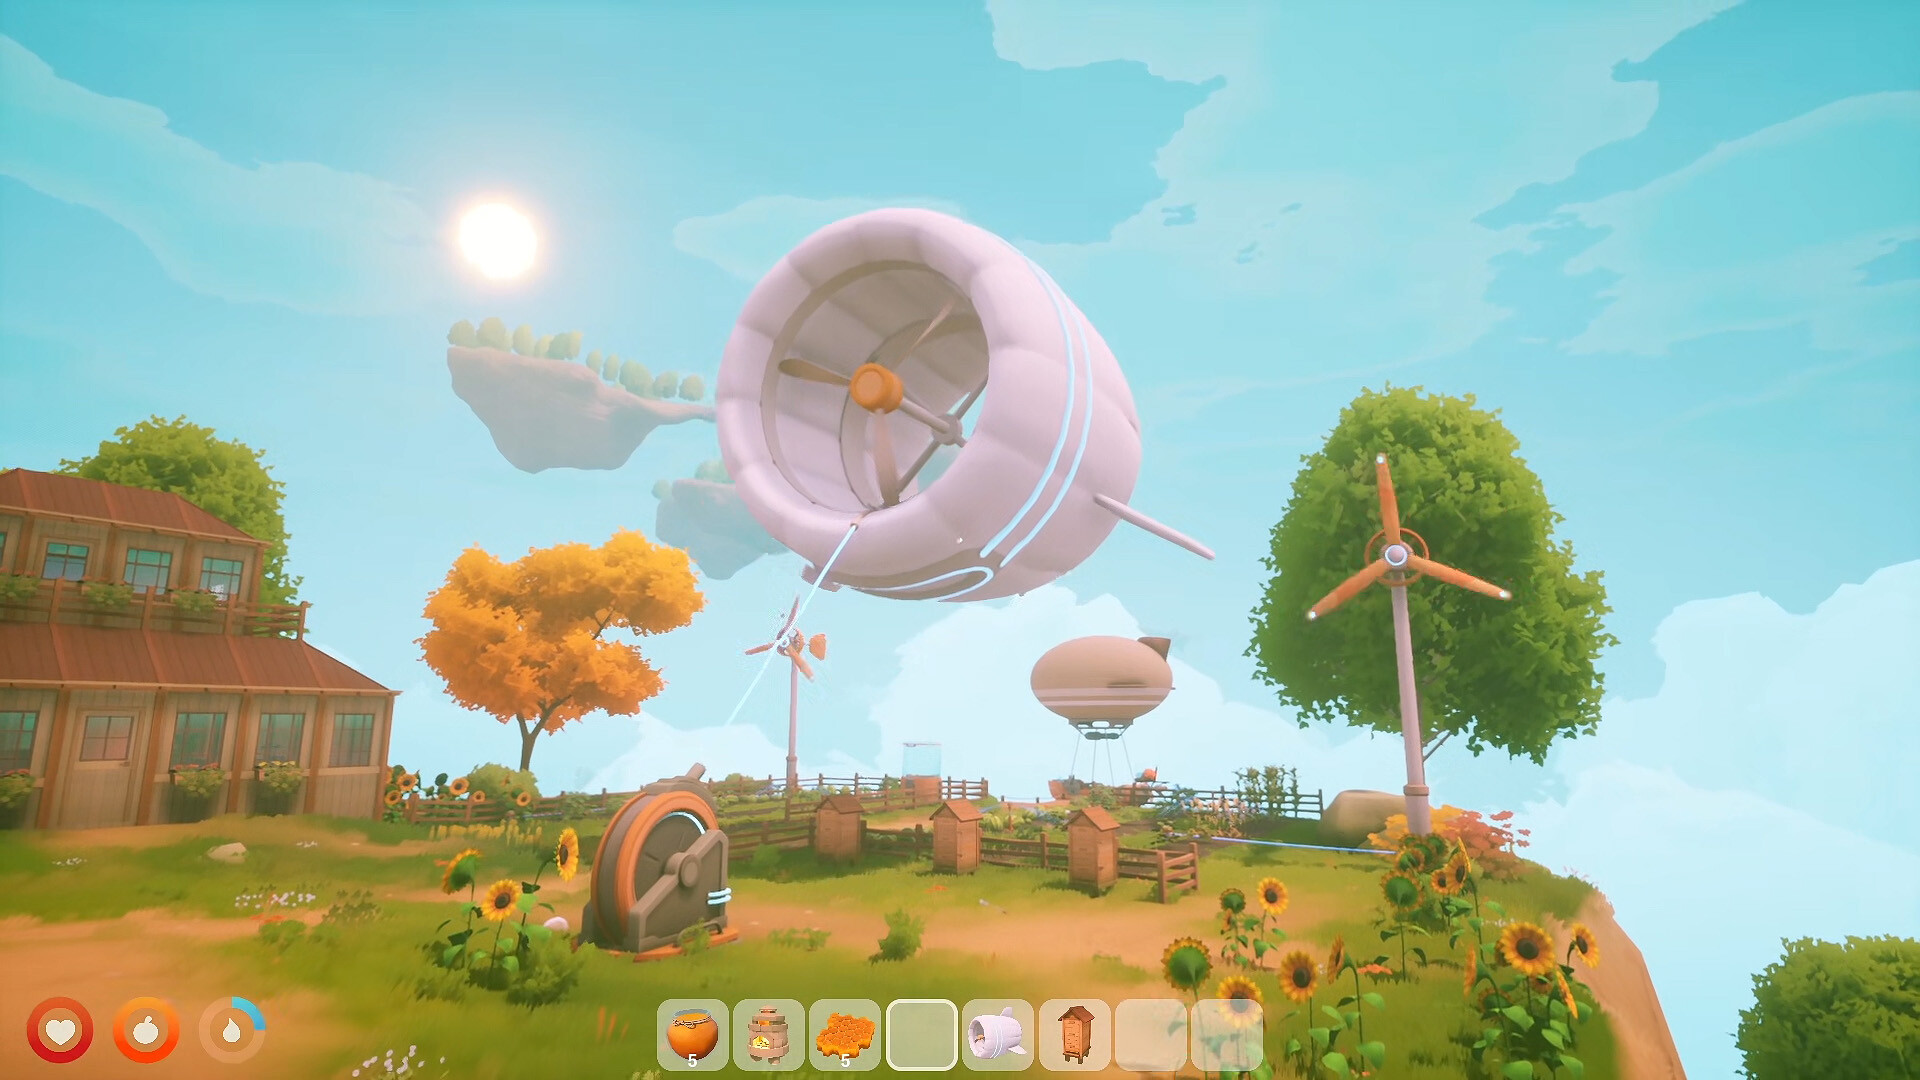 Solarpunk - first person survival craft game for PC/Console by